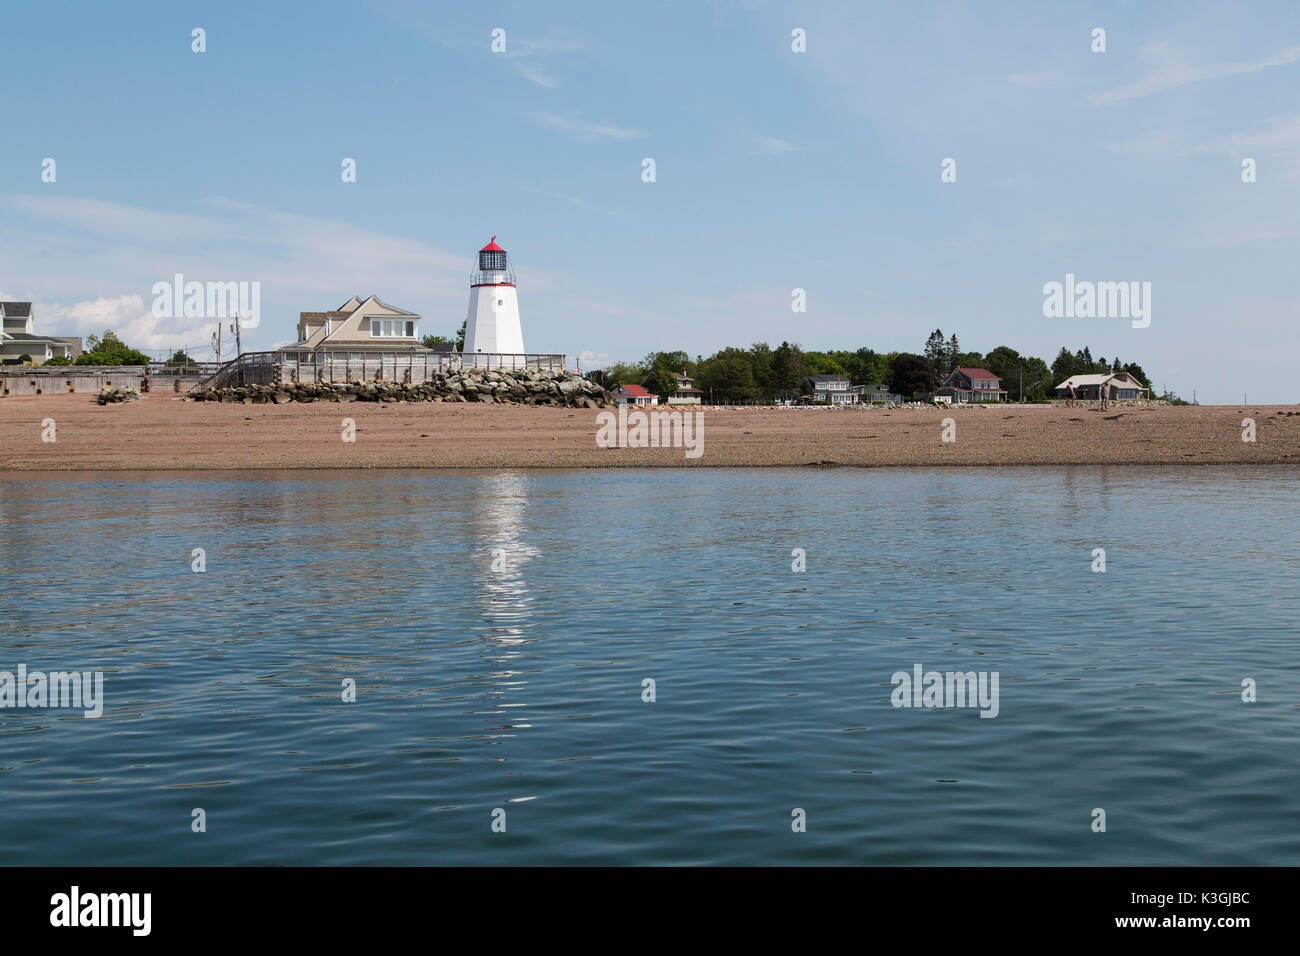 Pendlebury Lighthouse in St Andrews by-the-Sea in New Brunswick, Canada. The lighthouse looks out onto the water of the Passamaquoddy Bay. Stock Photo